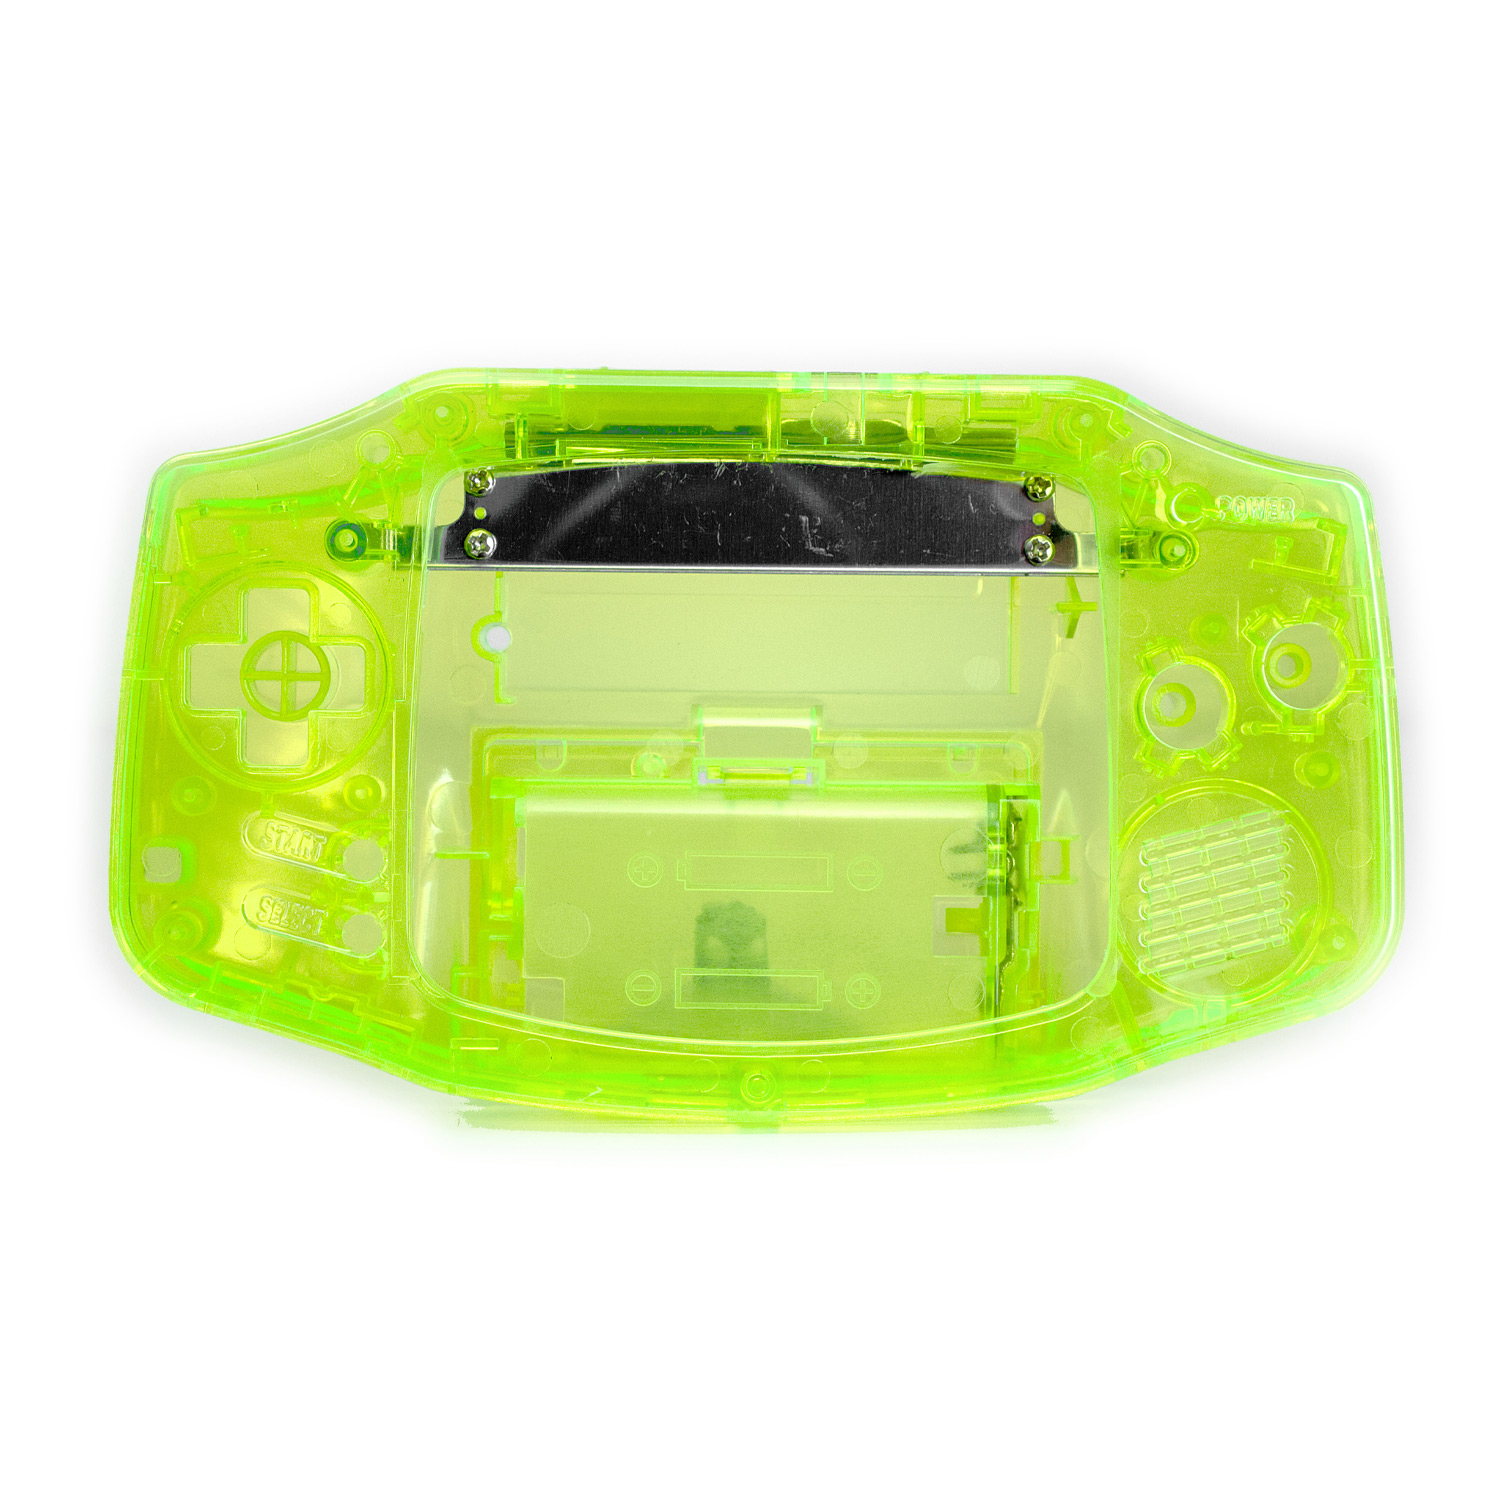 Game Boy Advance Shell for CleanScreen Laminated Kit (Crystal Yellow)